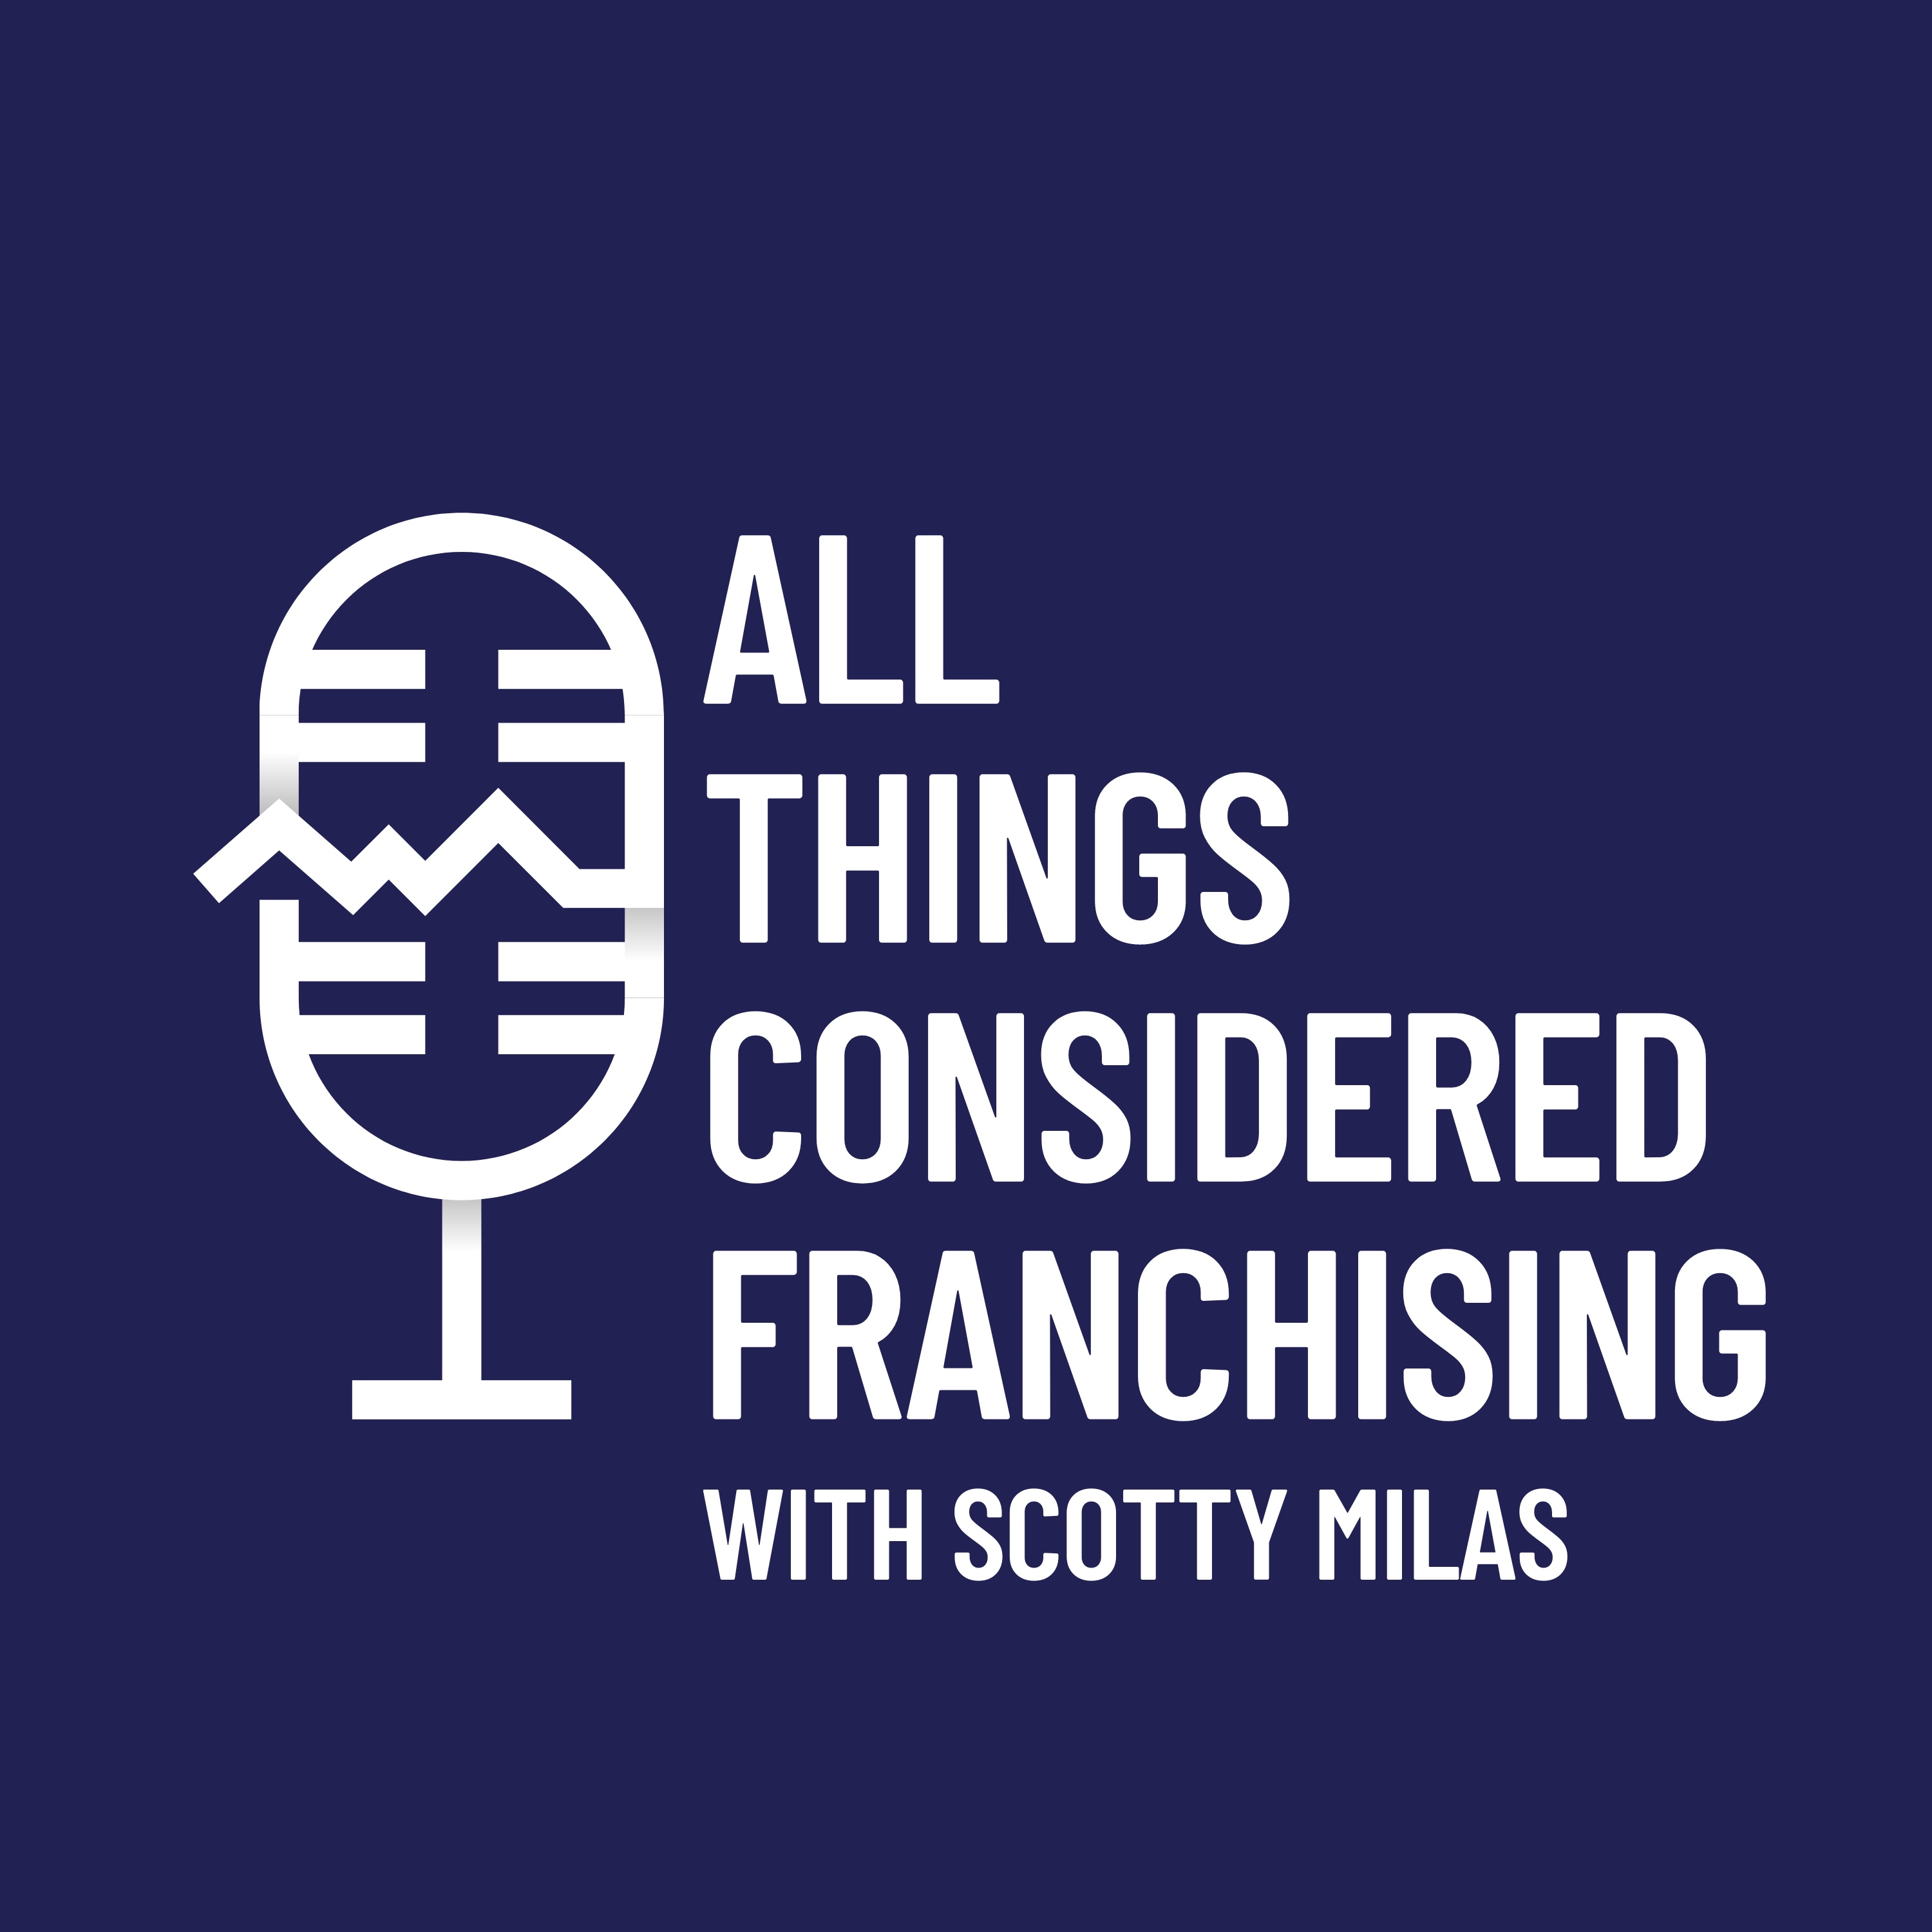 Scotty Milas' All Things Considered Franchising Podcast with George DeMambro of Schooley Mitchell